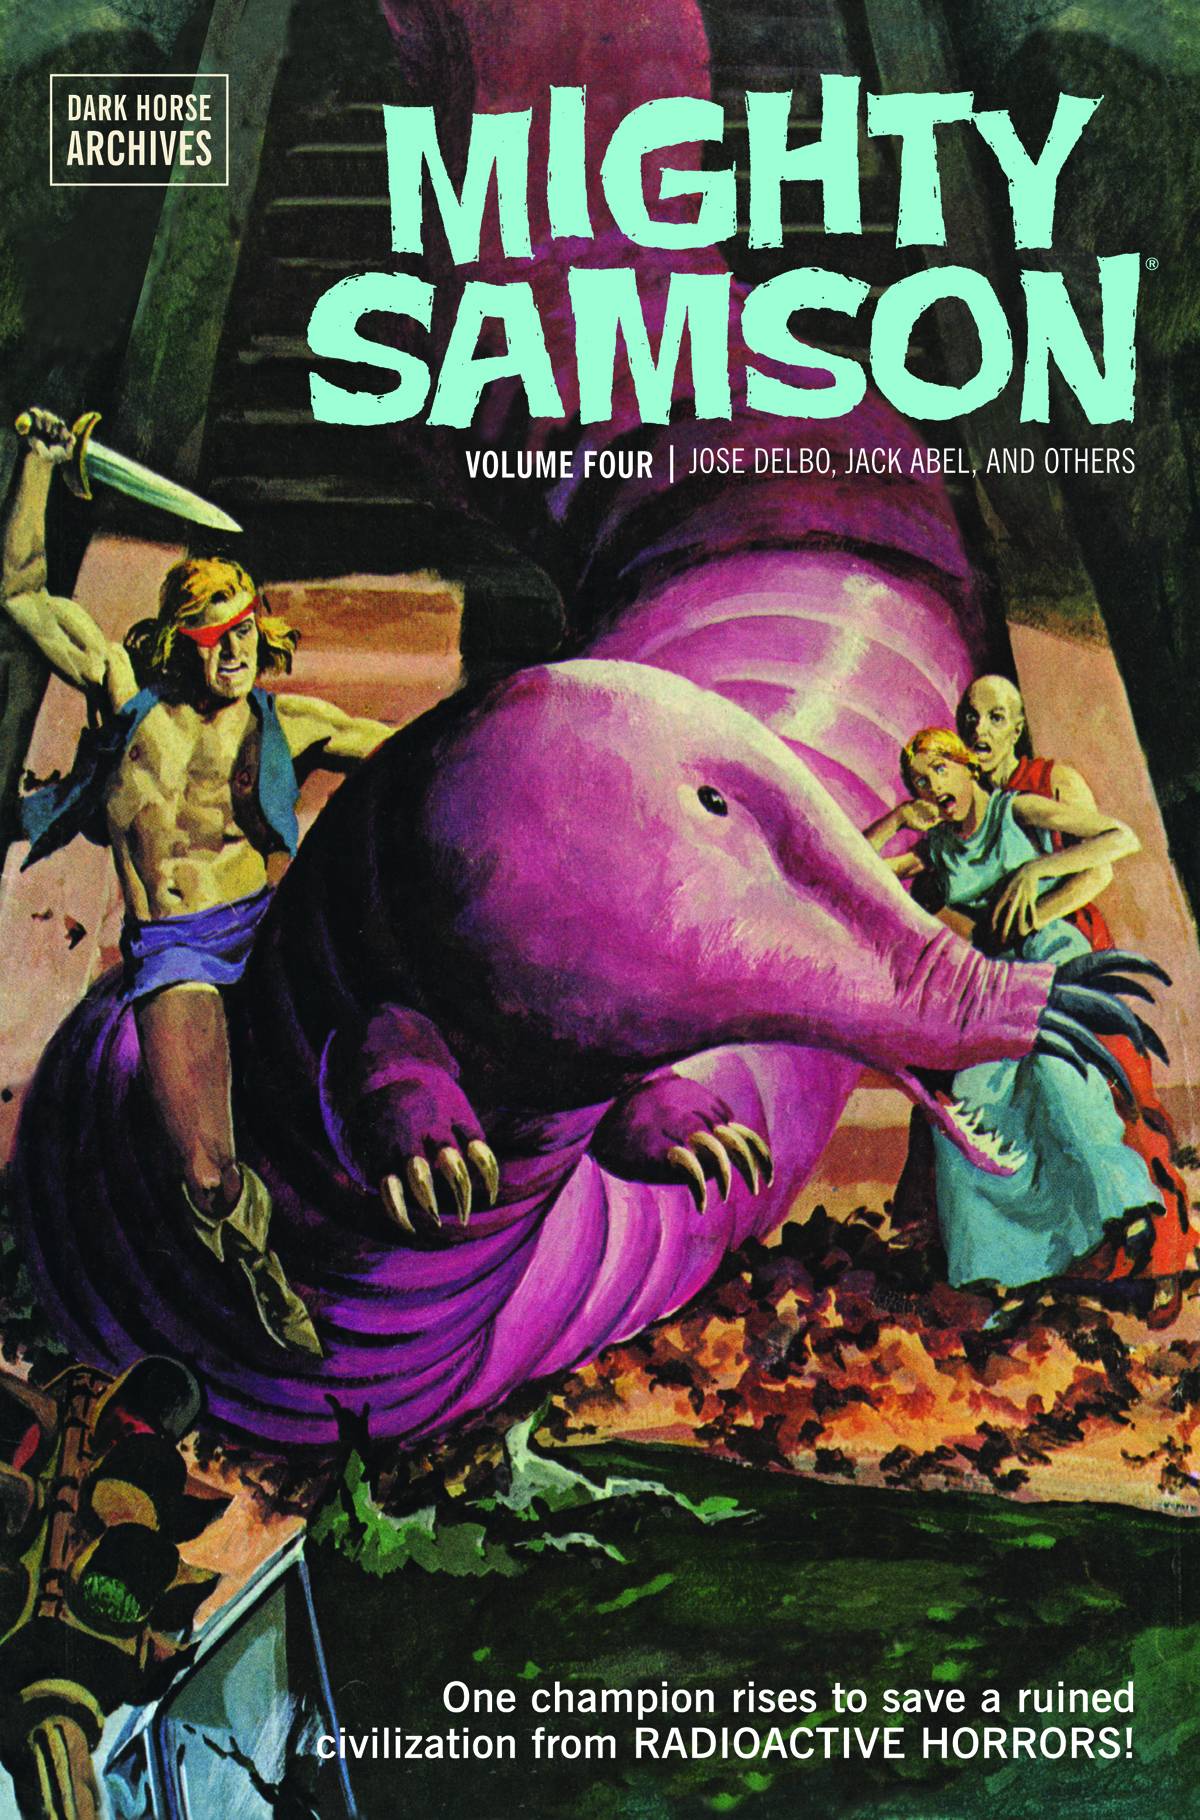 Mighty Samson Archives Hardcover Volume 4